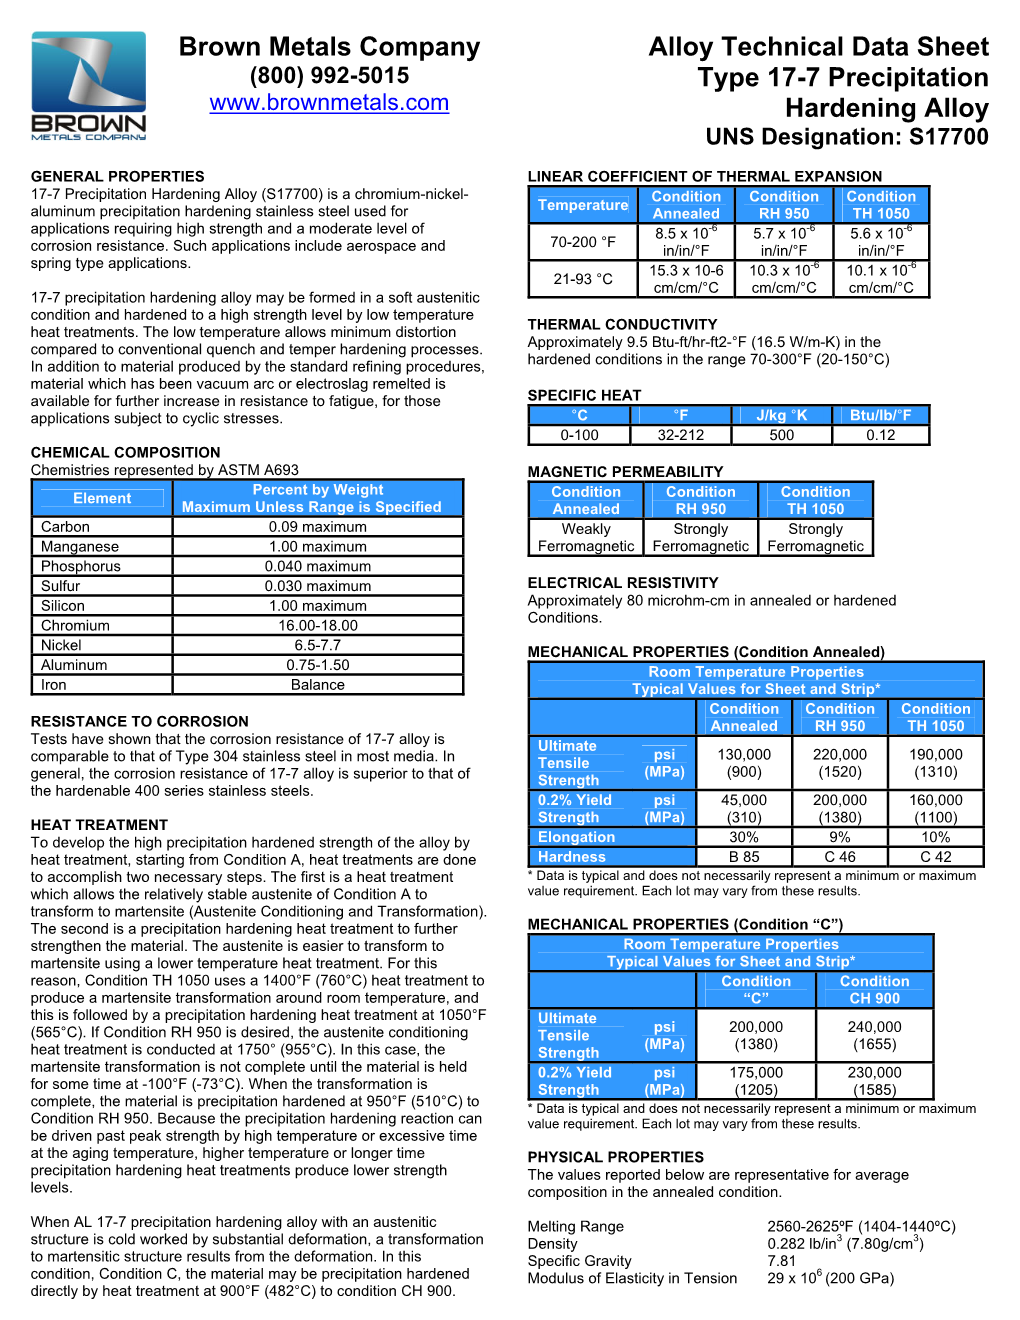 Brown Metals Company Alloy Technical Data Sheet Type 17-7